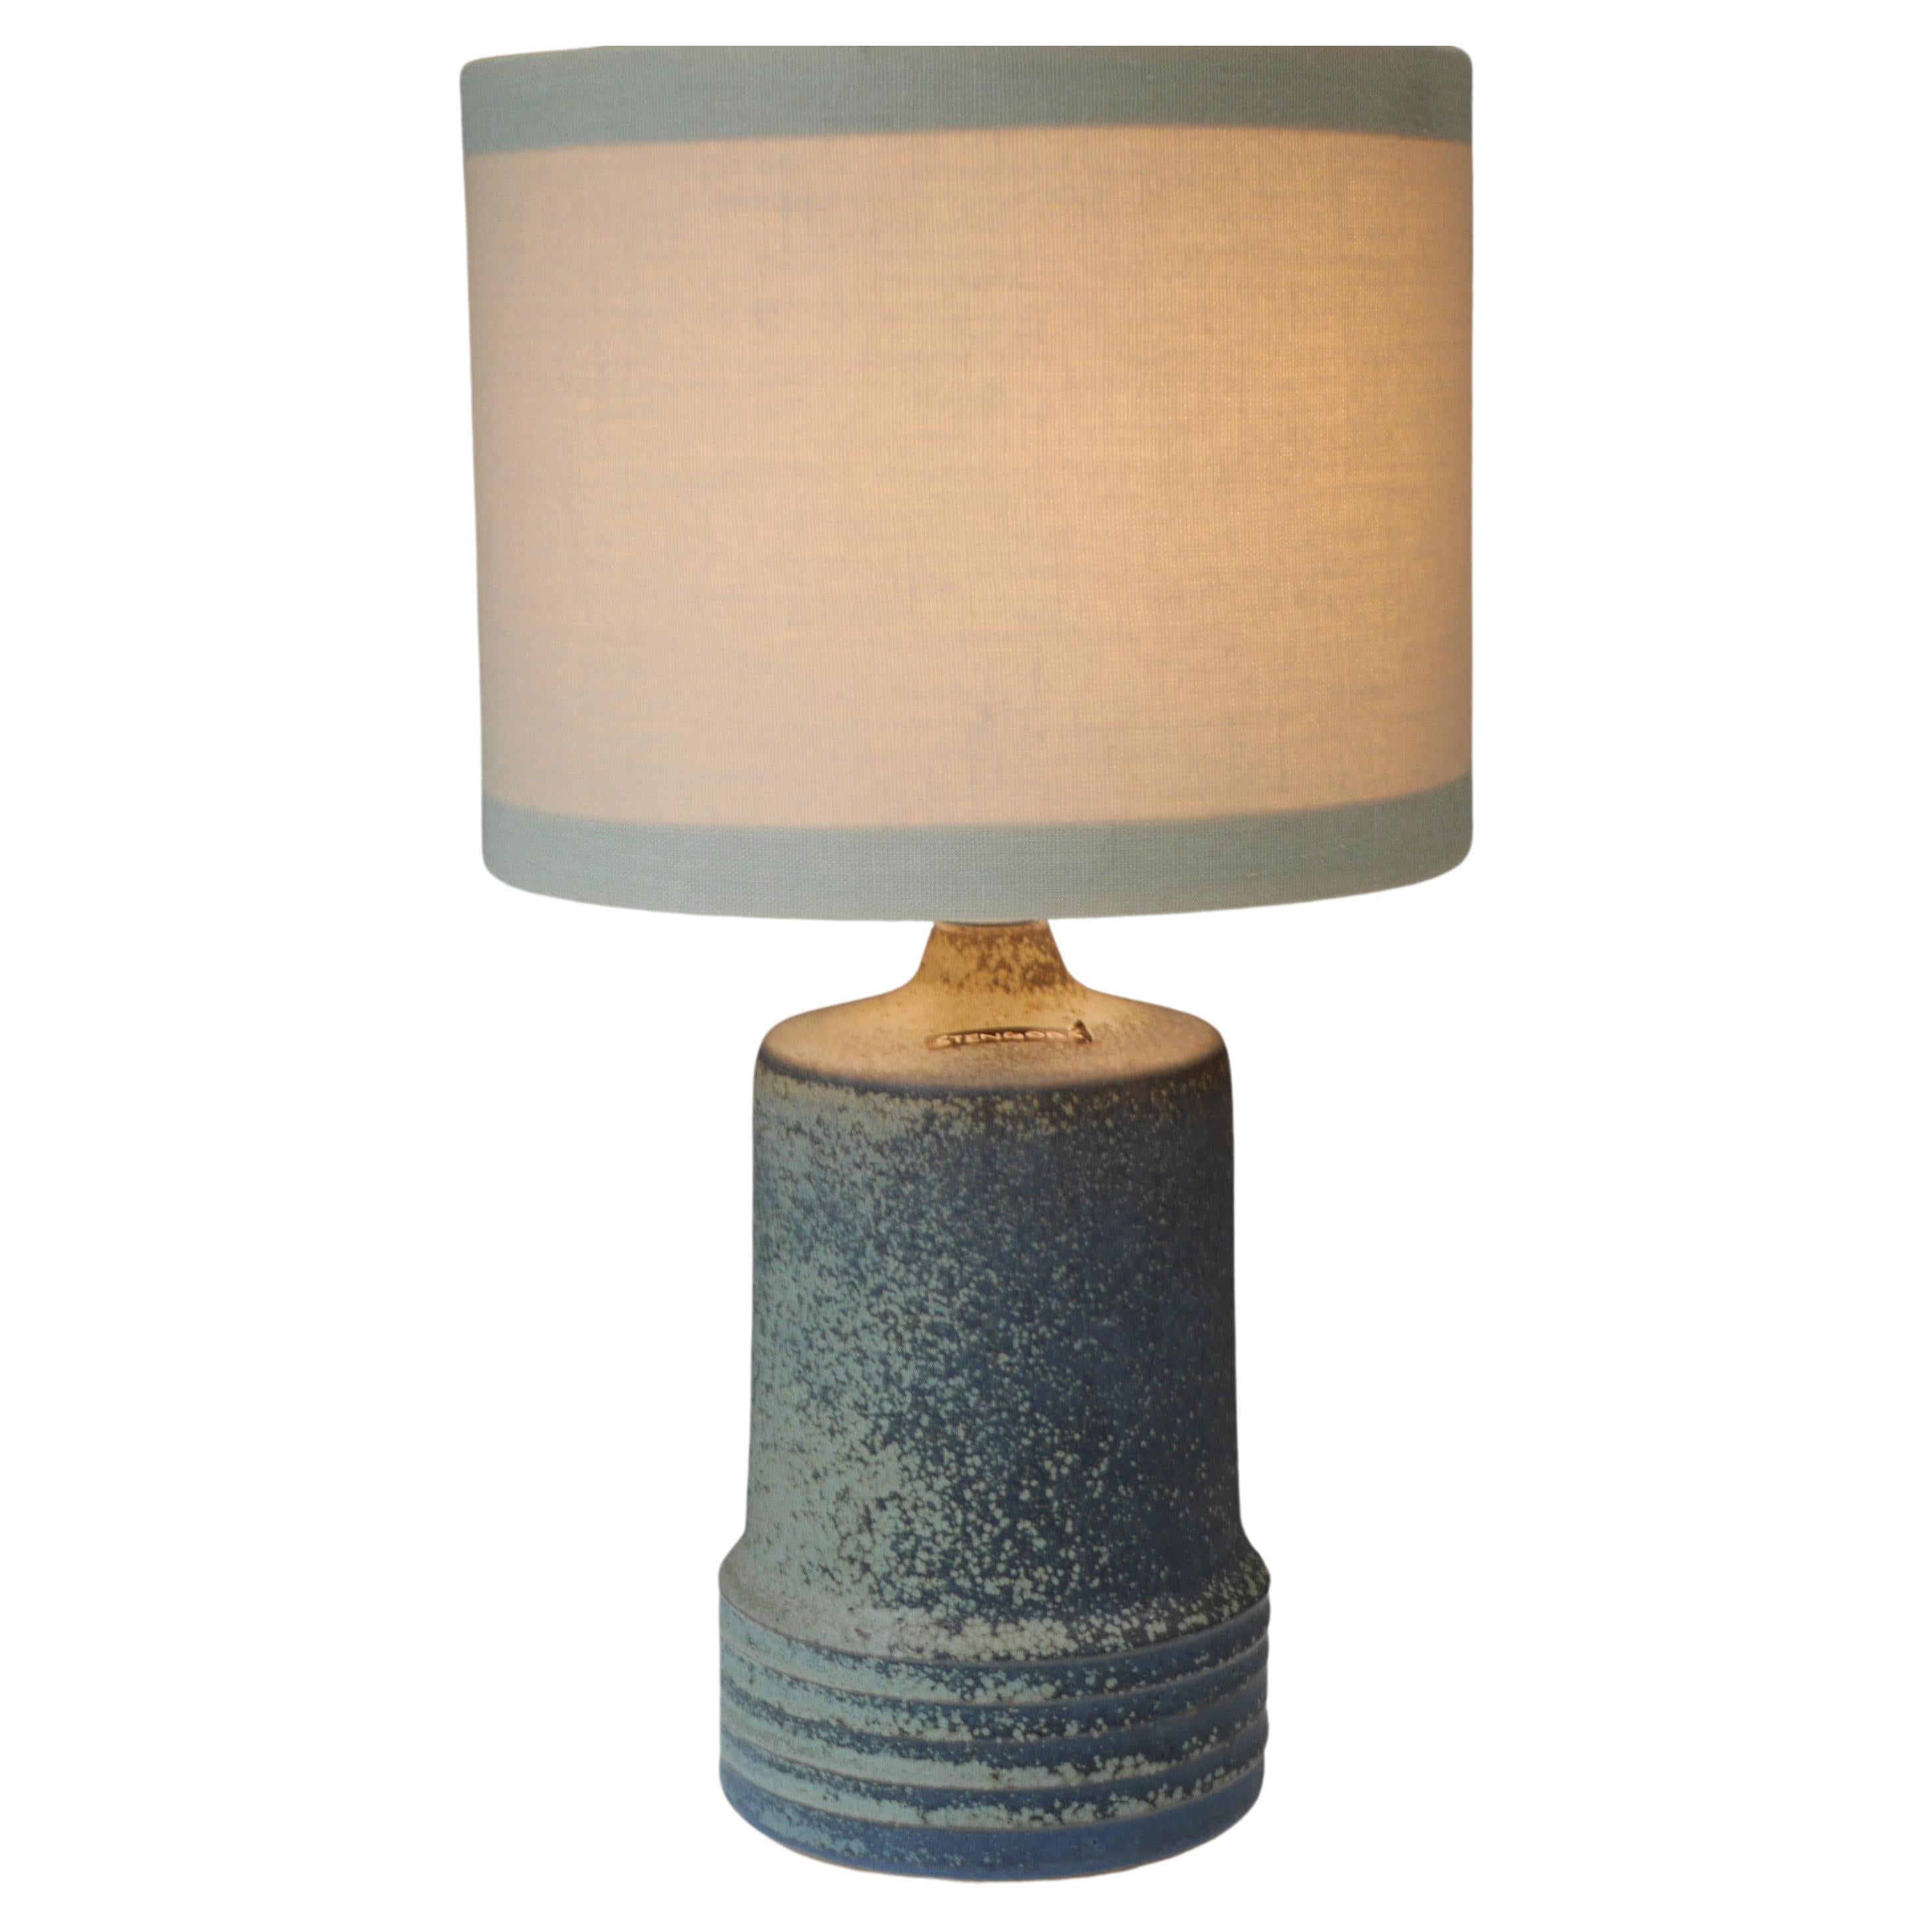 Mid-century modern pottery table lamp made by Rolf Palm, Sweden.  For Sale